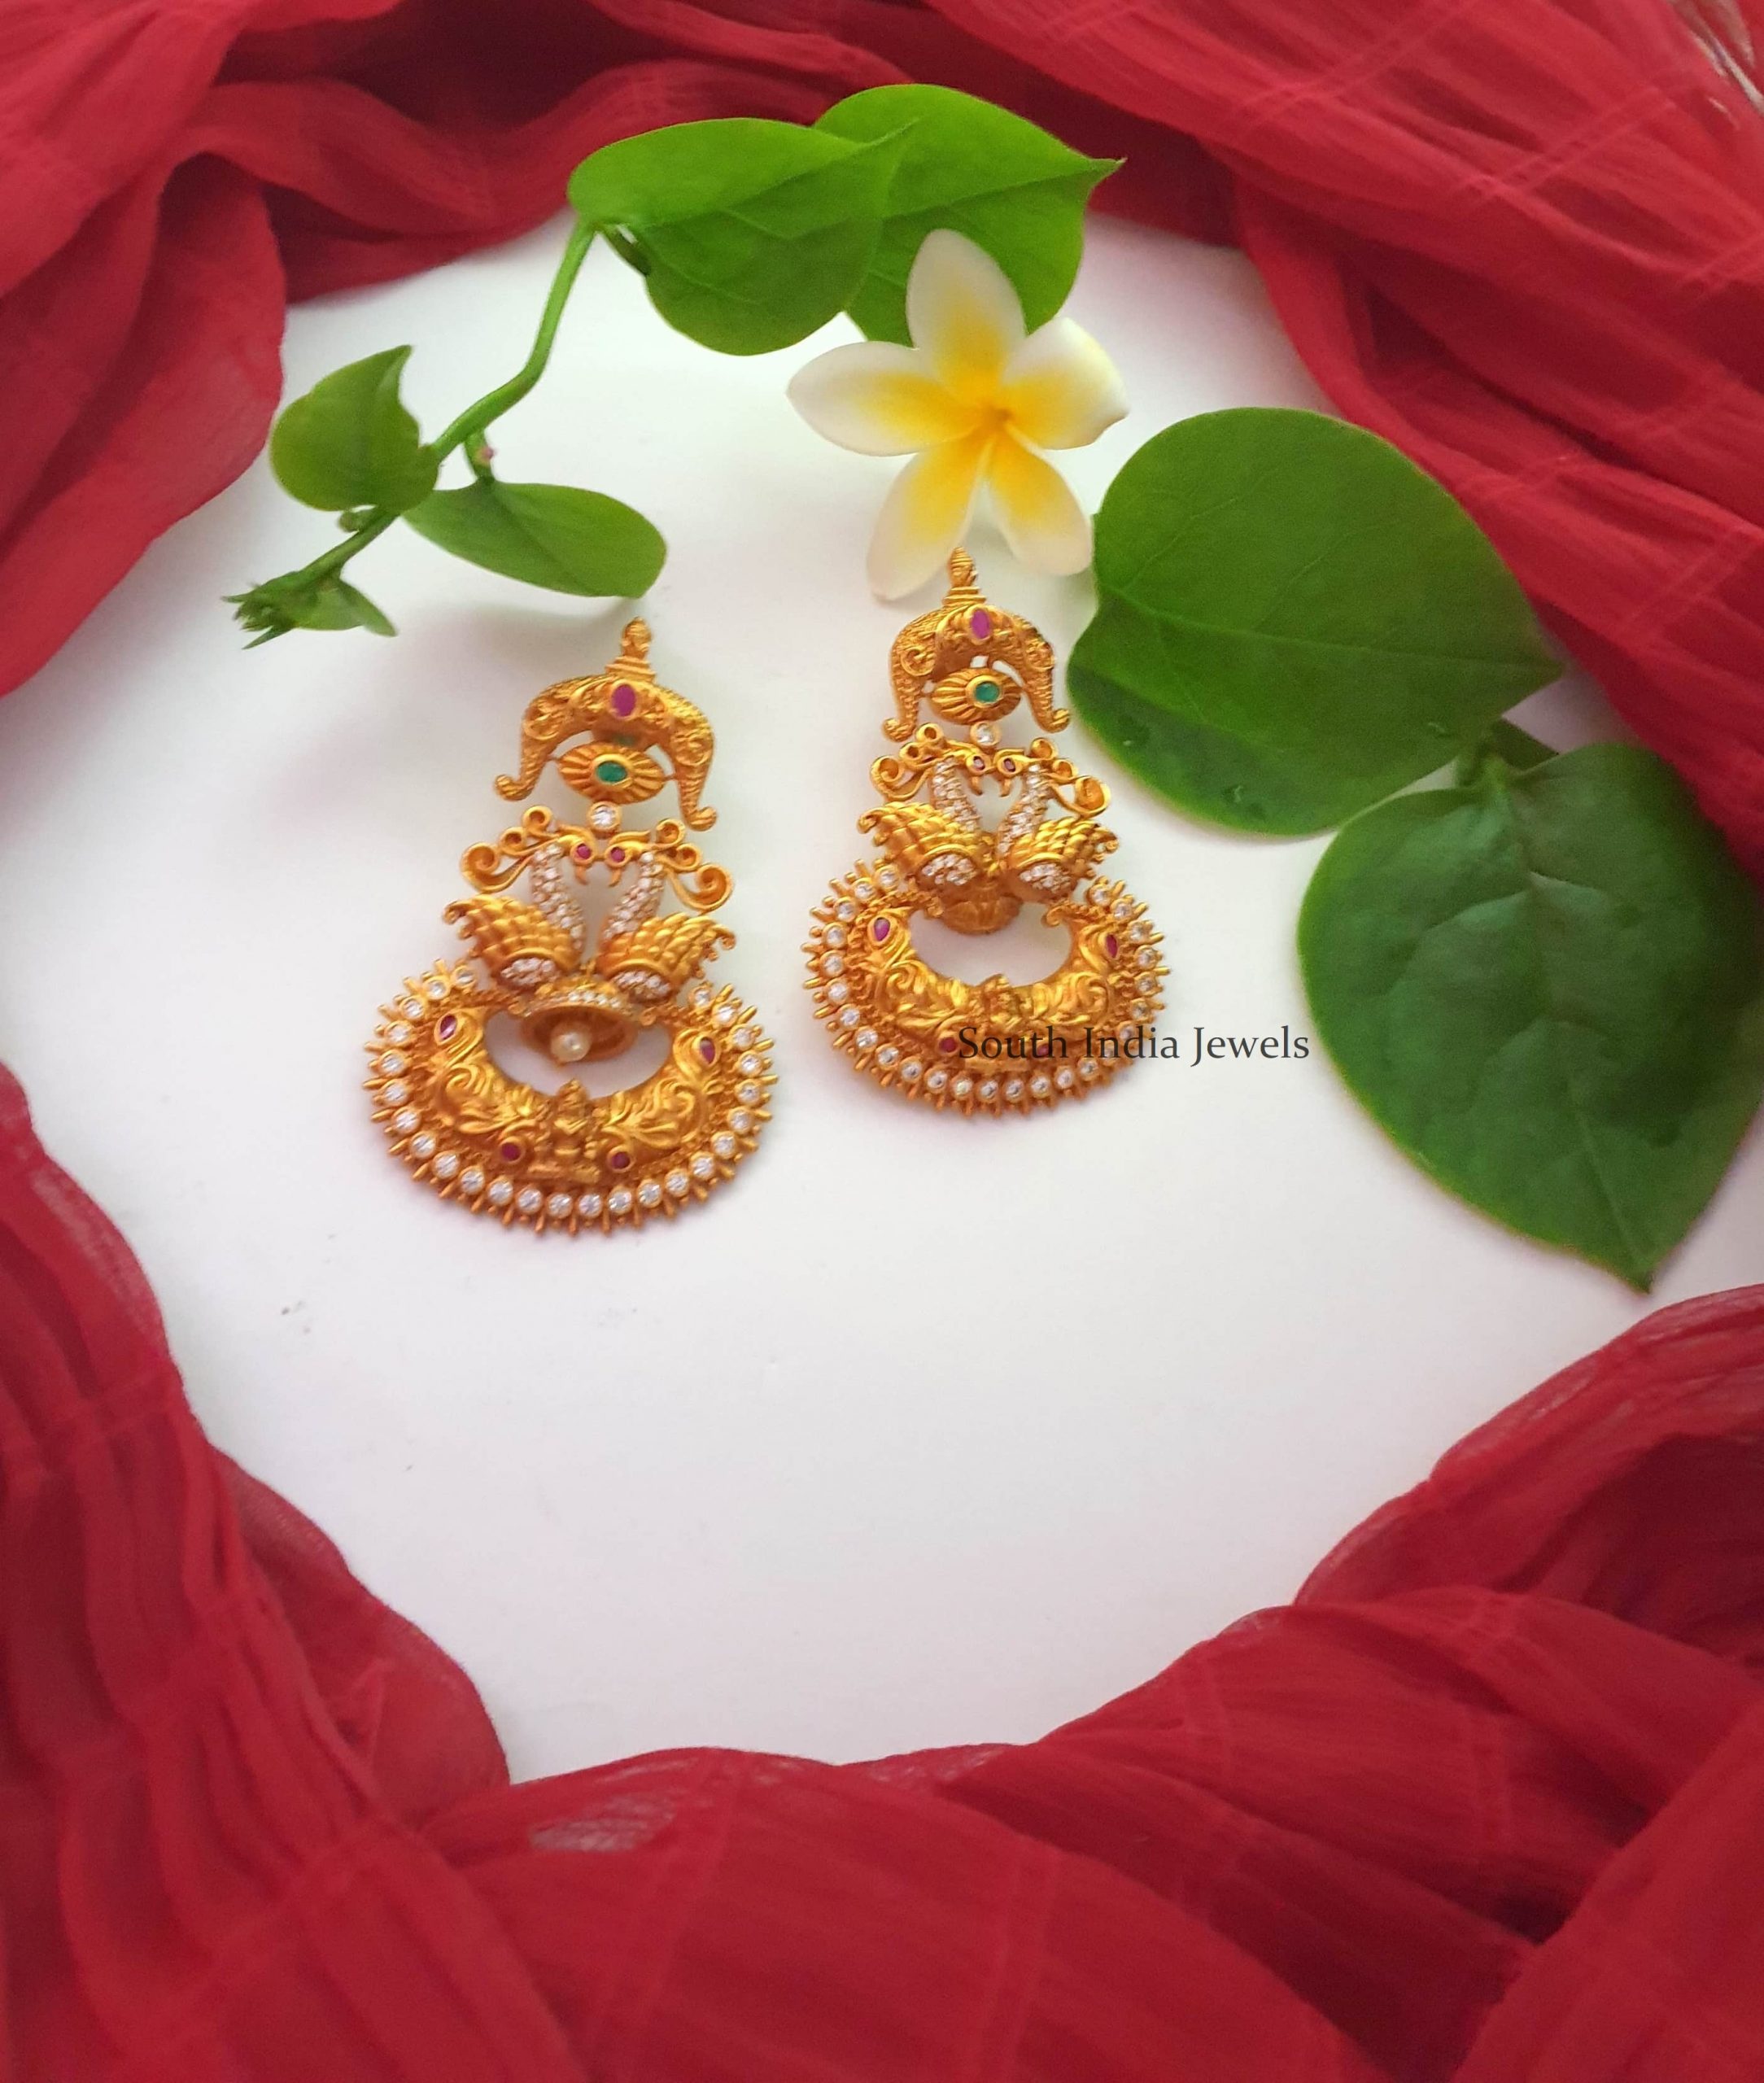 Aggregate more than 77 chand bali gold earrings designs latest ...